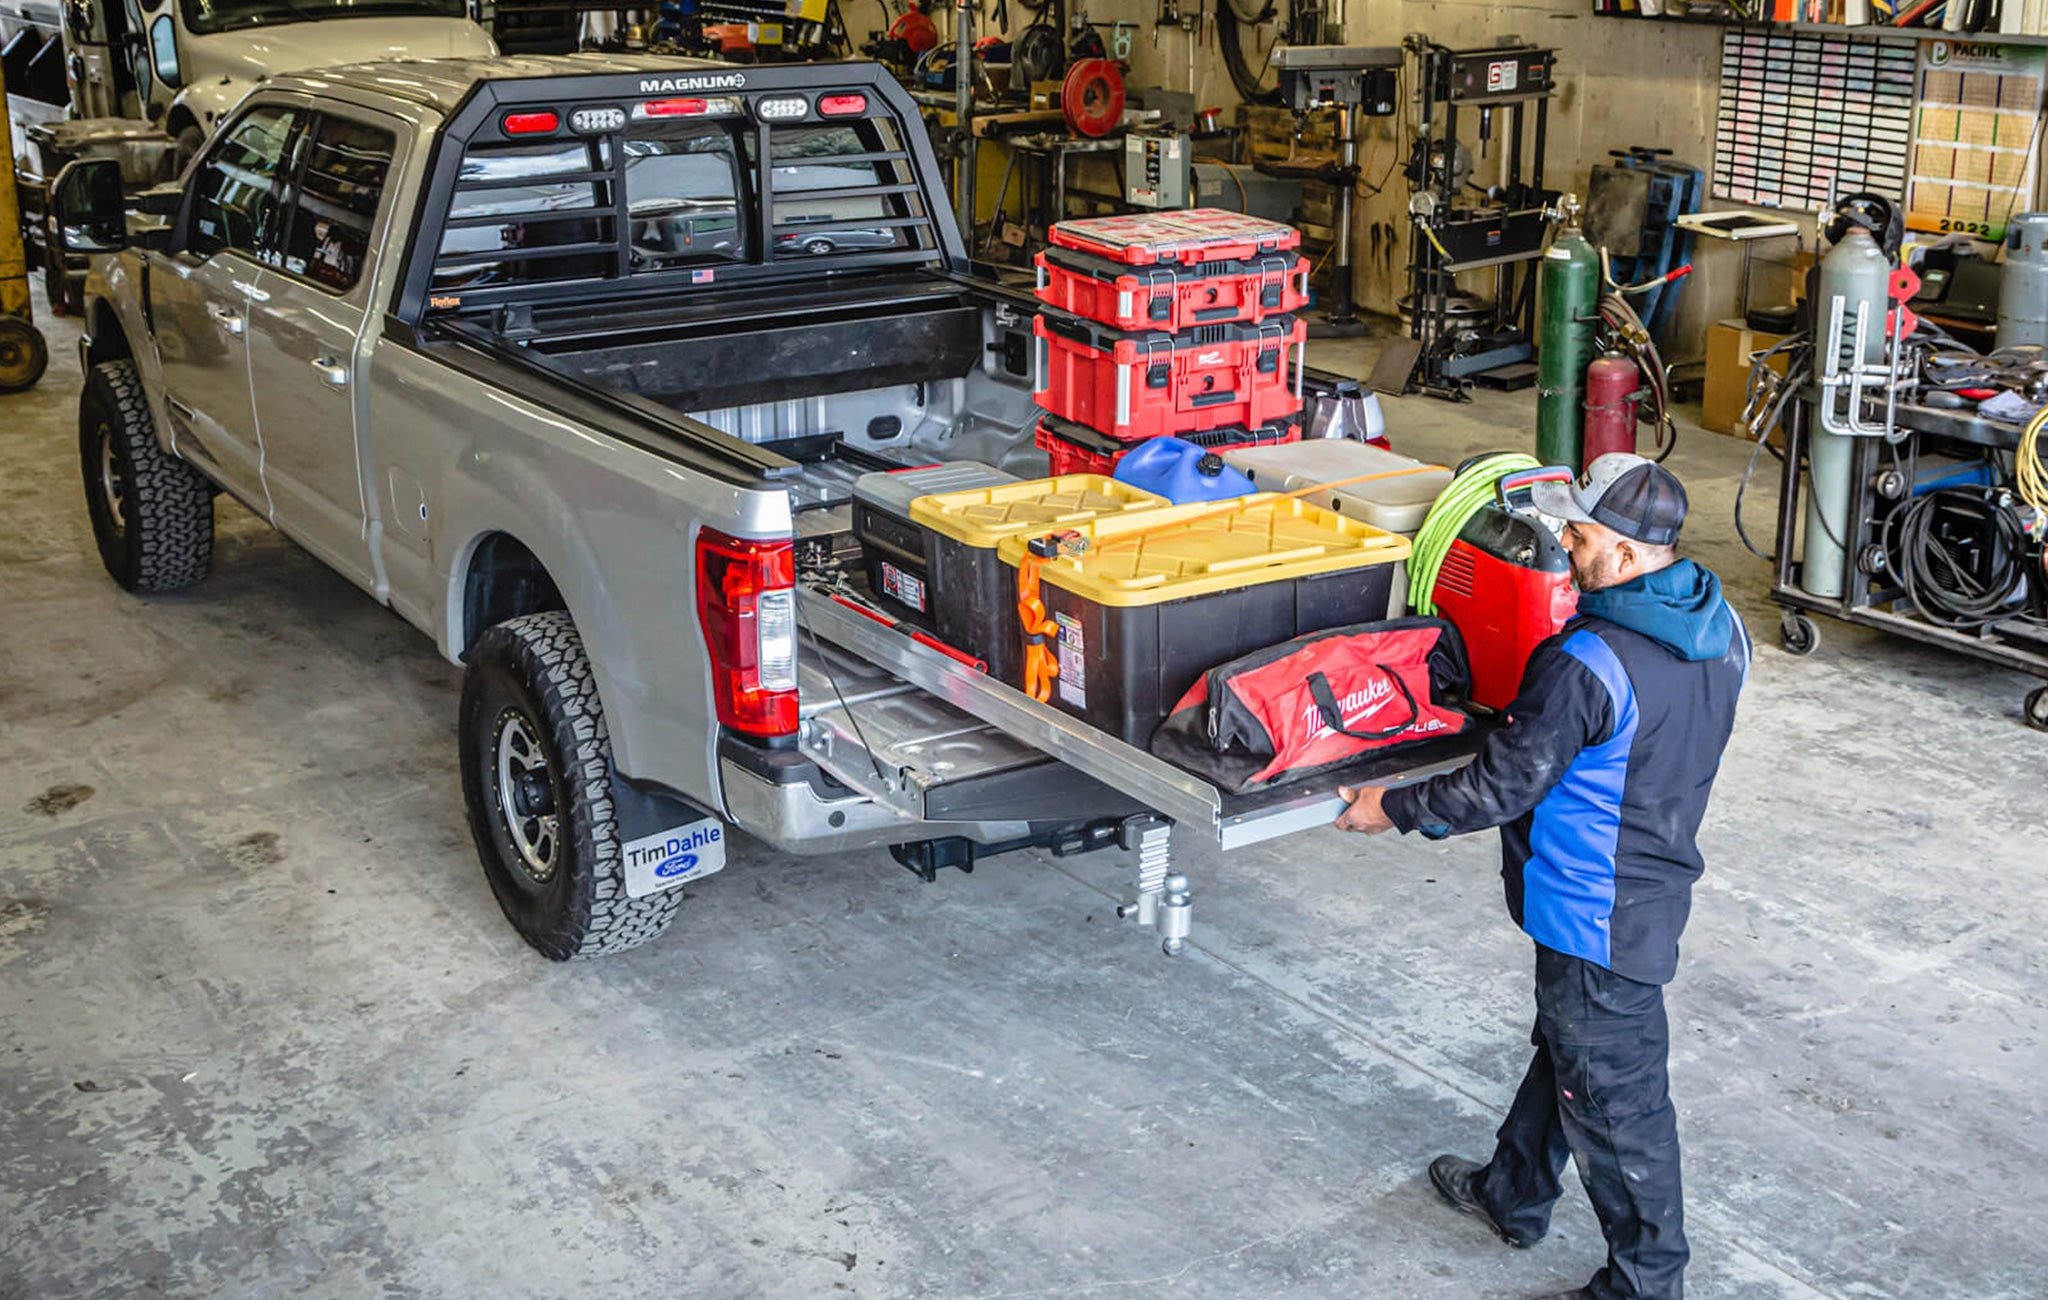 Man pulling out a cargoglide loaded down with tools in an auto shop